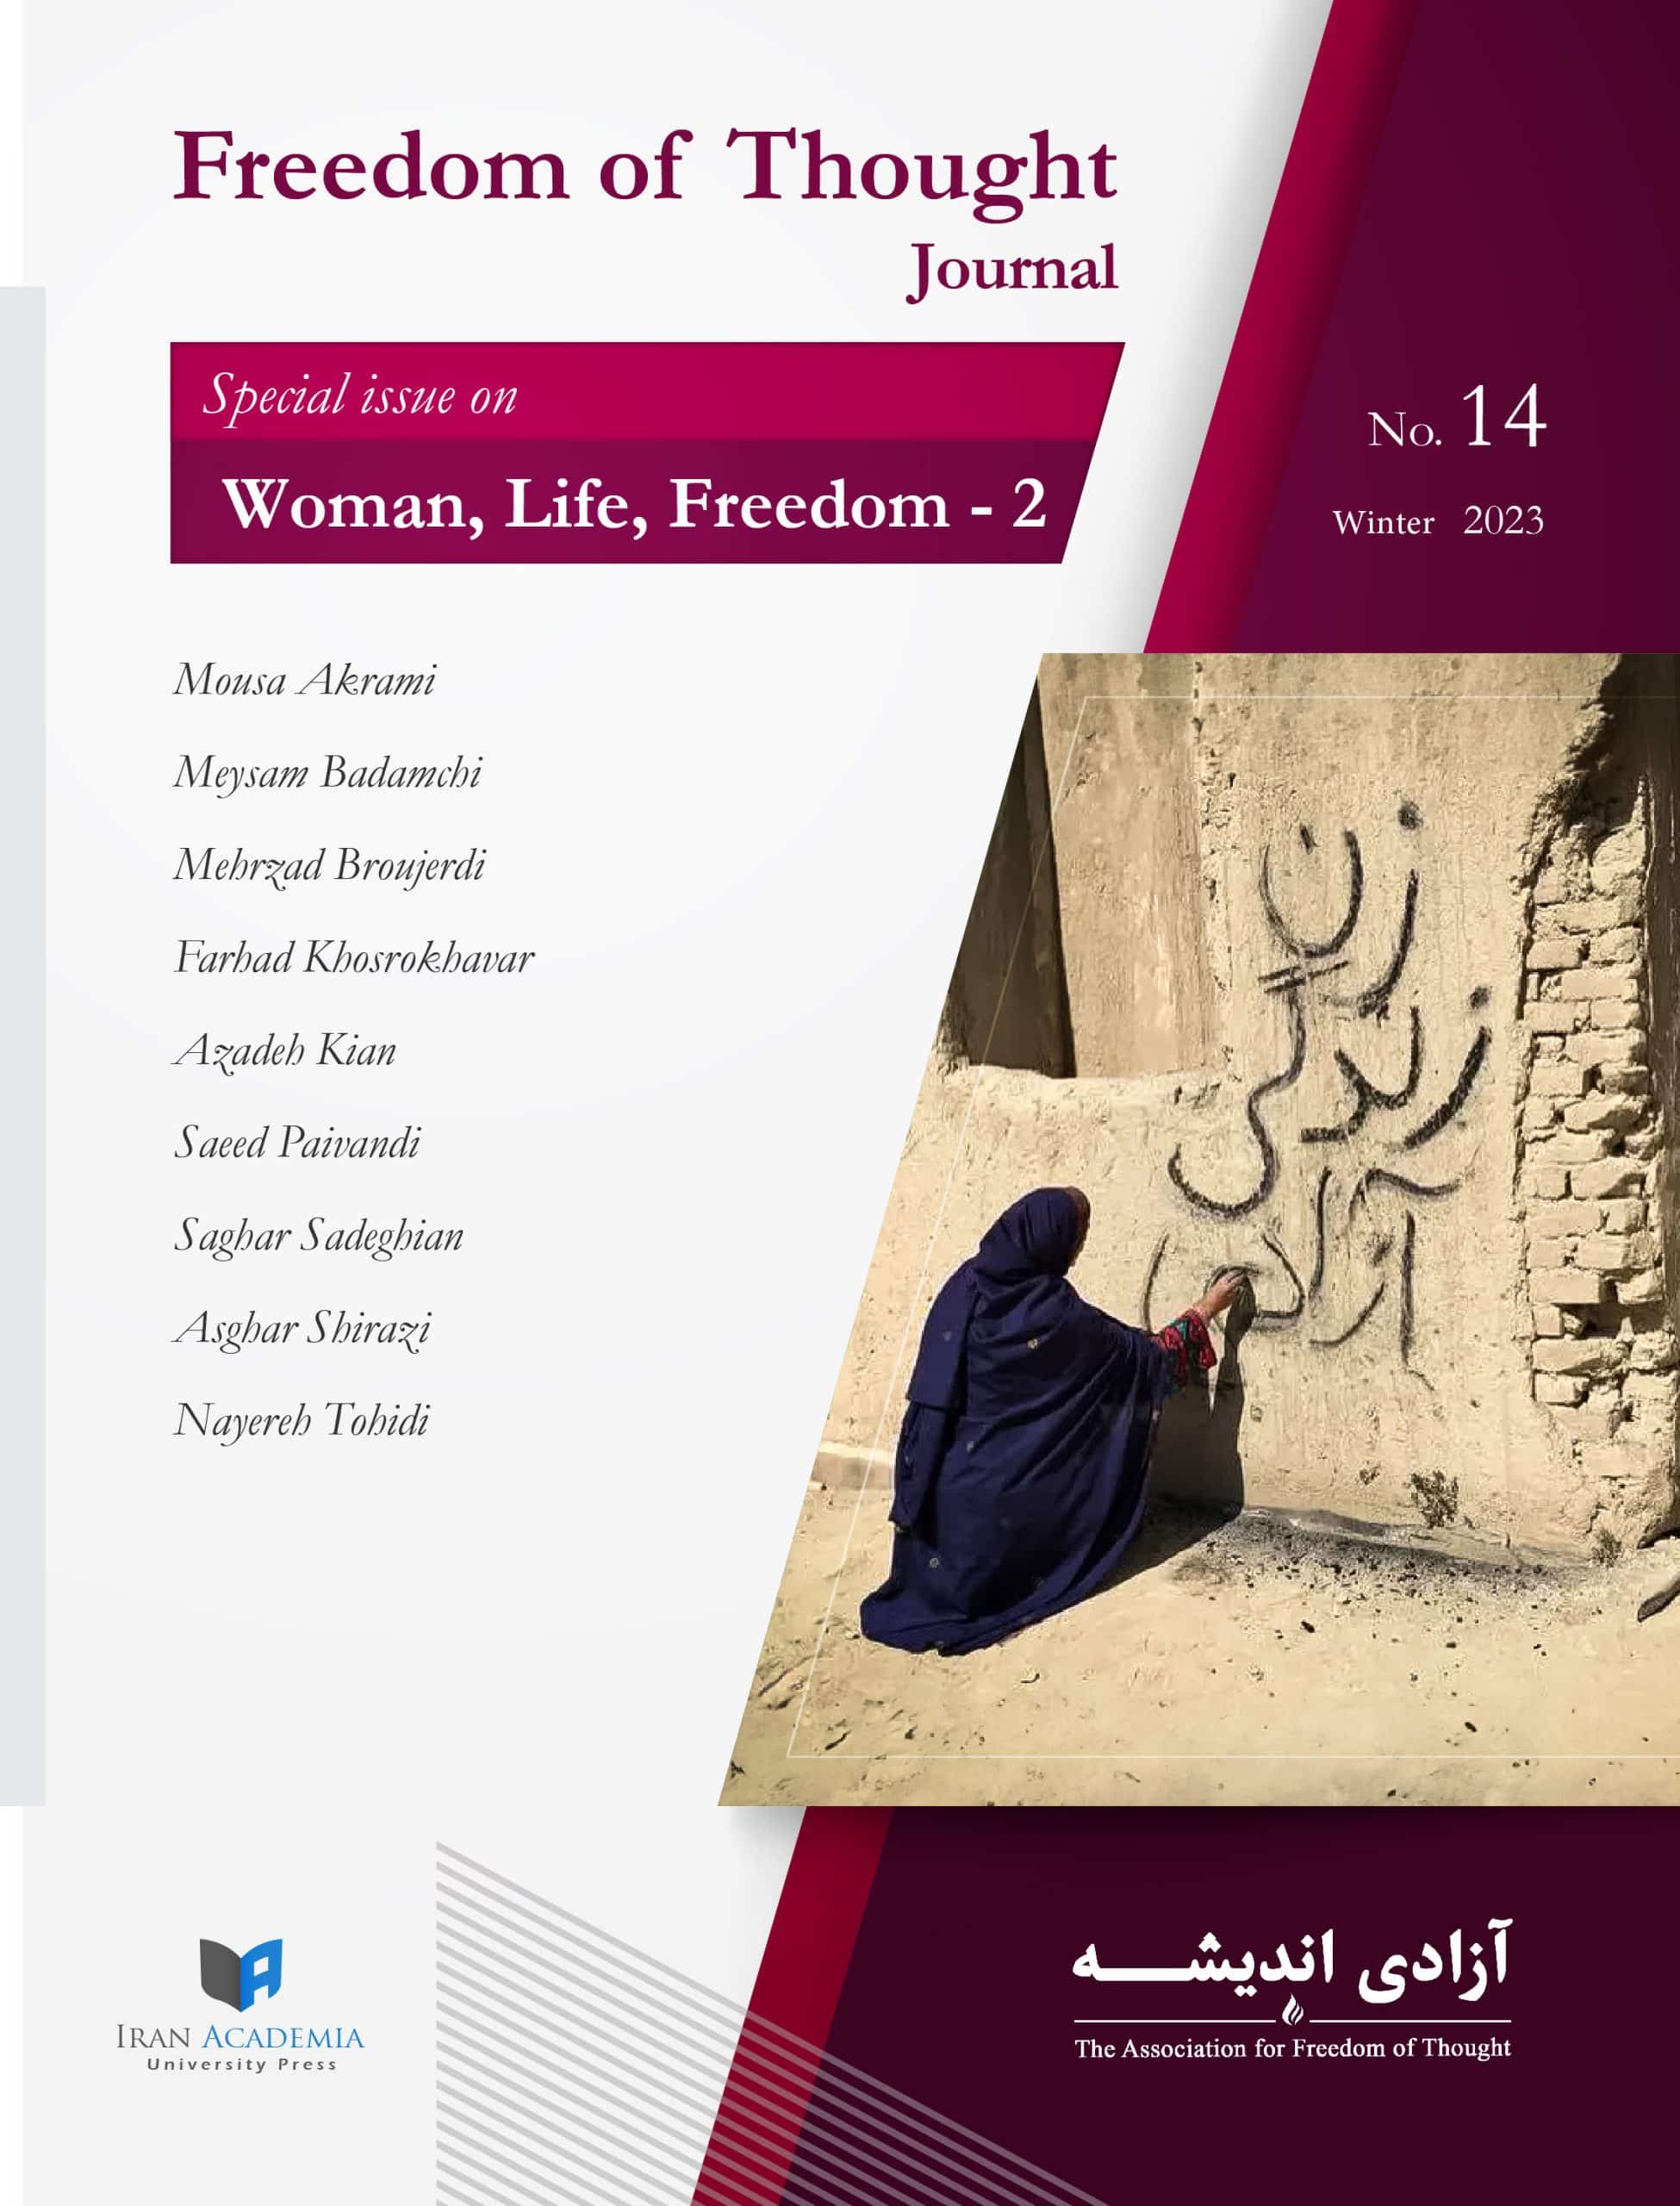 Freedom of Thought Journal Issue 14 Cover